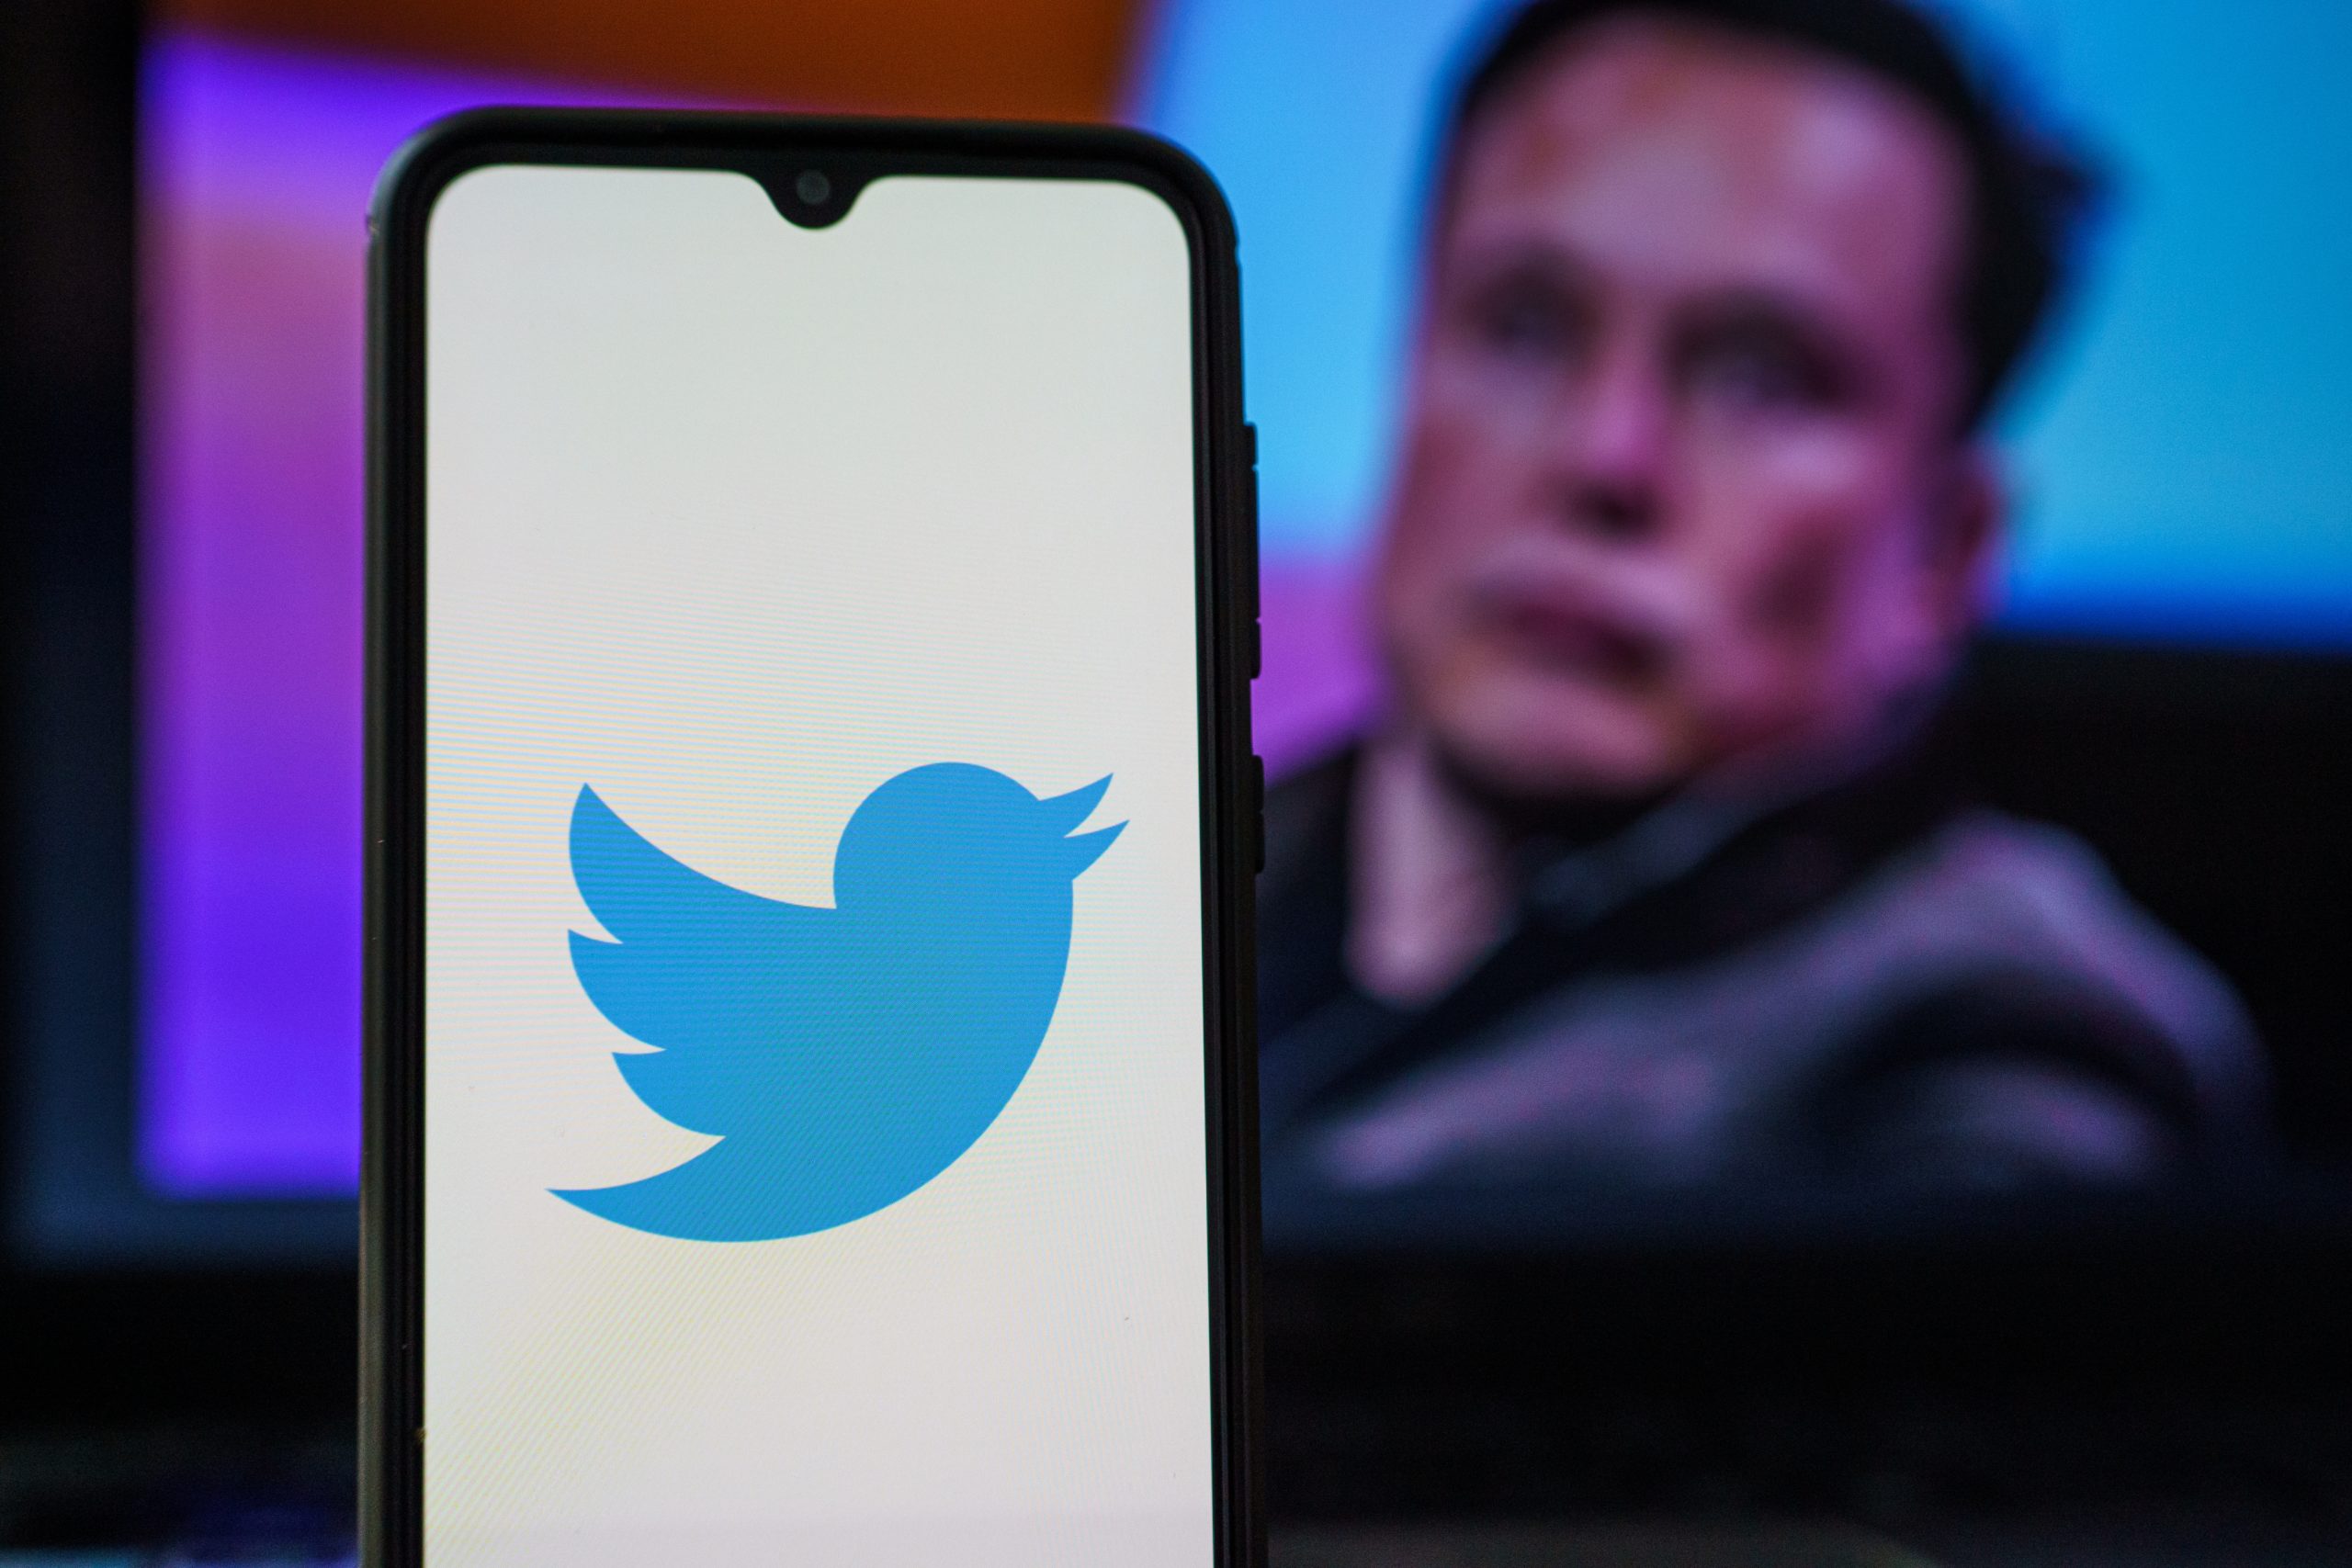 Elon Musk Wants to Authenticate Every Twitter User. Crypto Twitter Should Take Notice